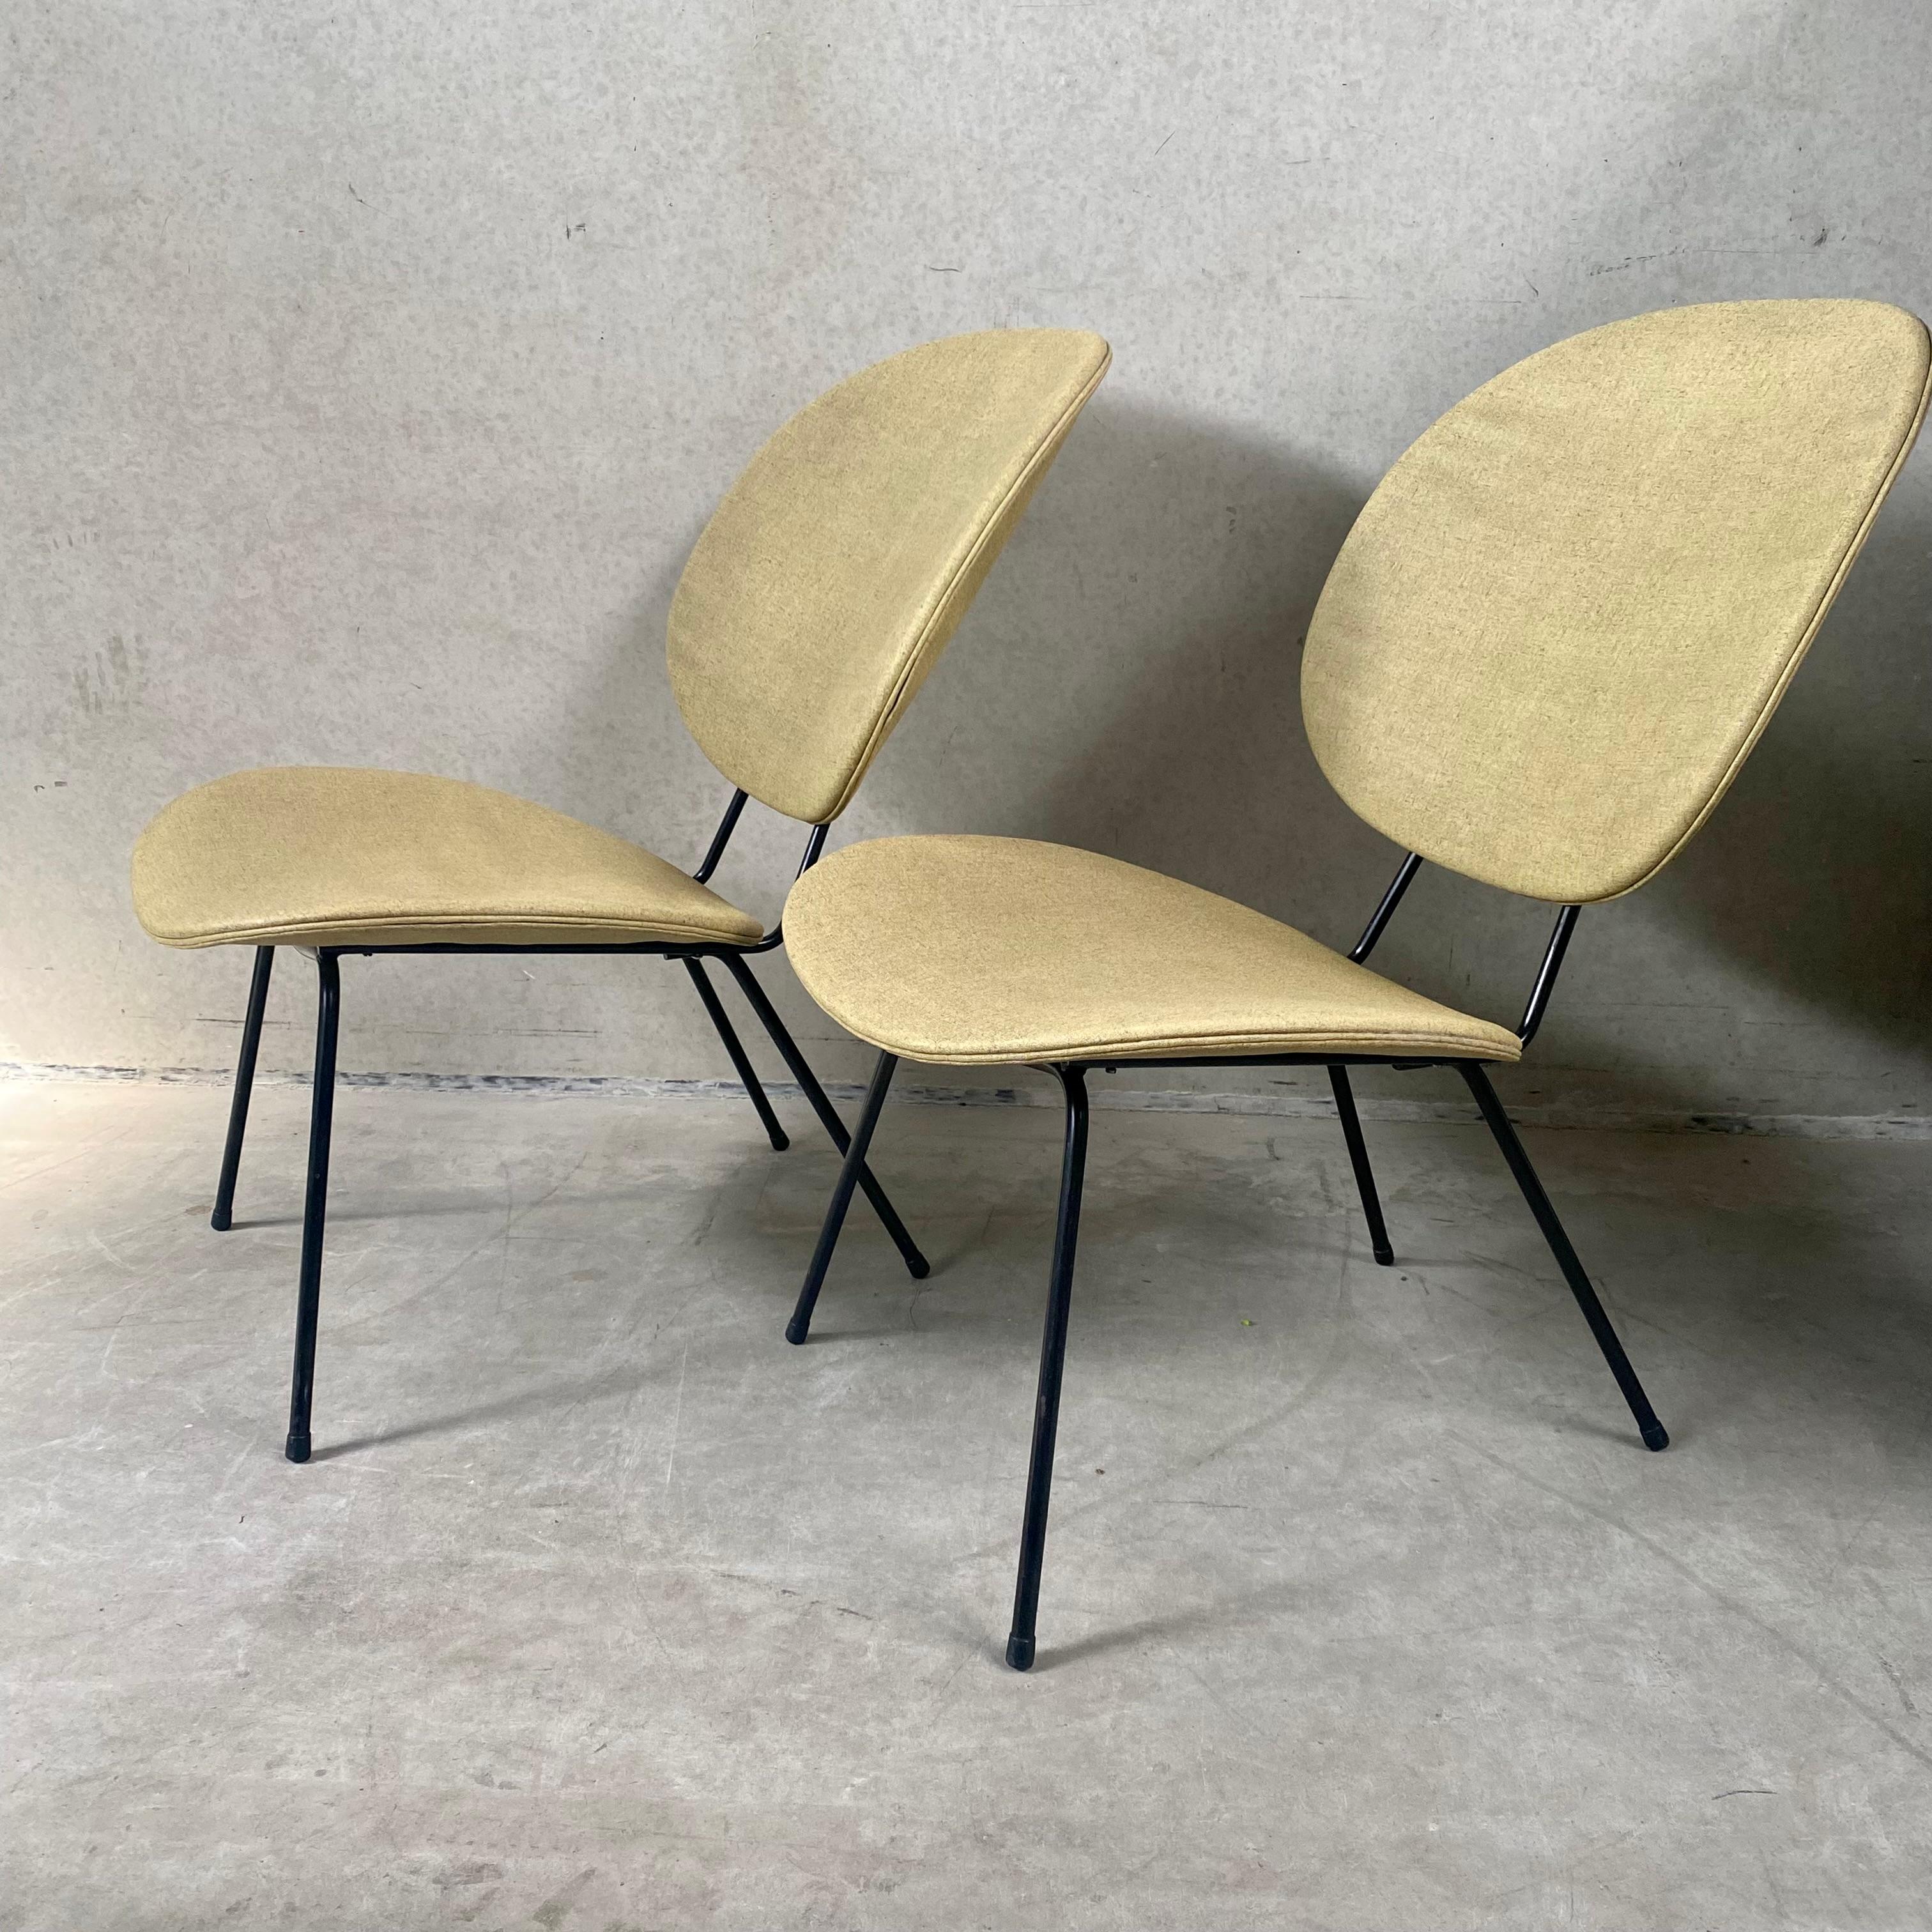 Dutch Set of 2 Lounge Chairs by W.H. Gispen for Kembo, Netherlands 1950 For Sale